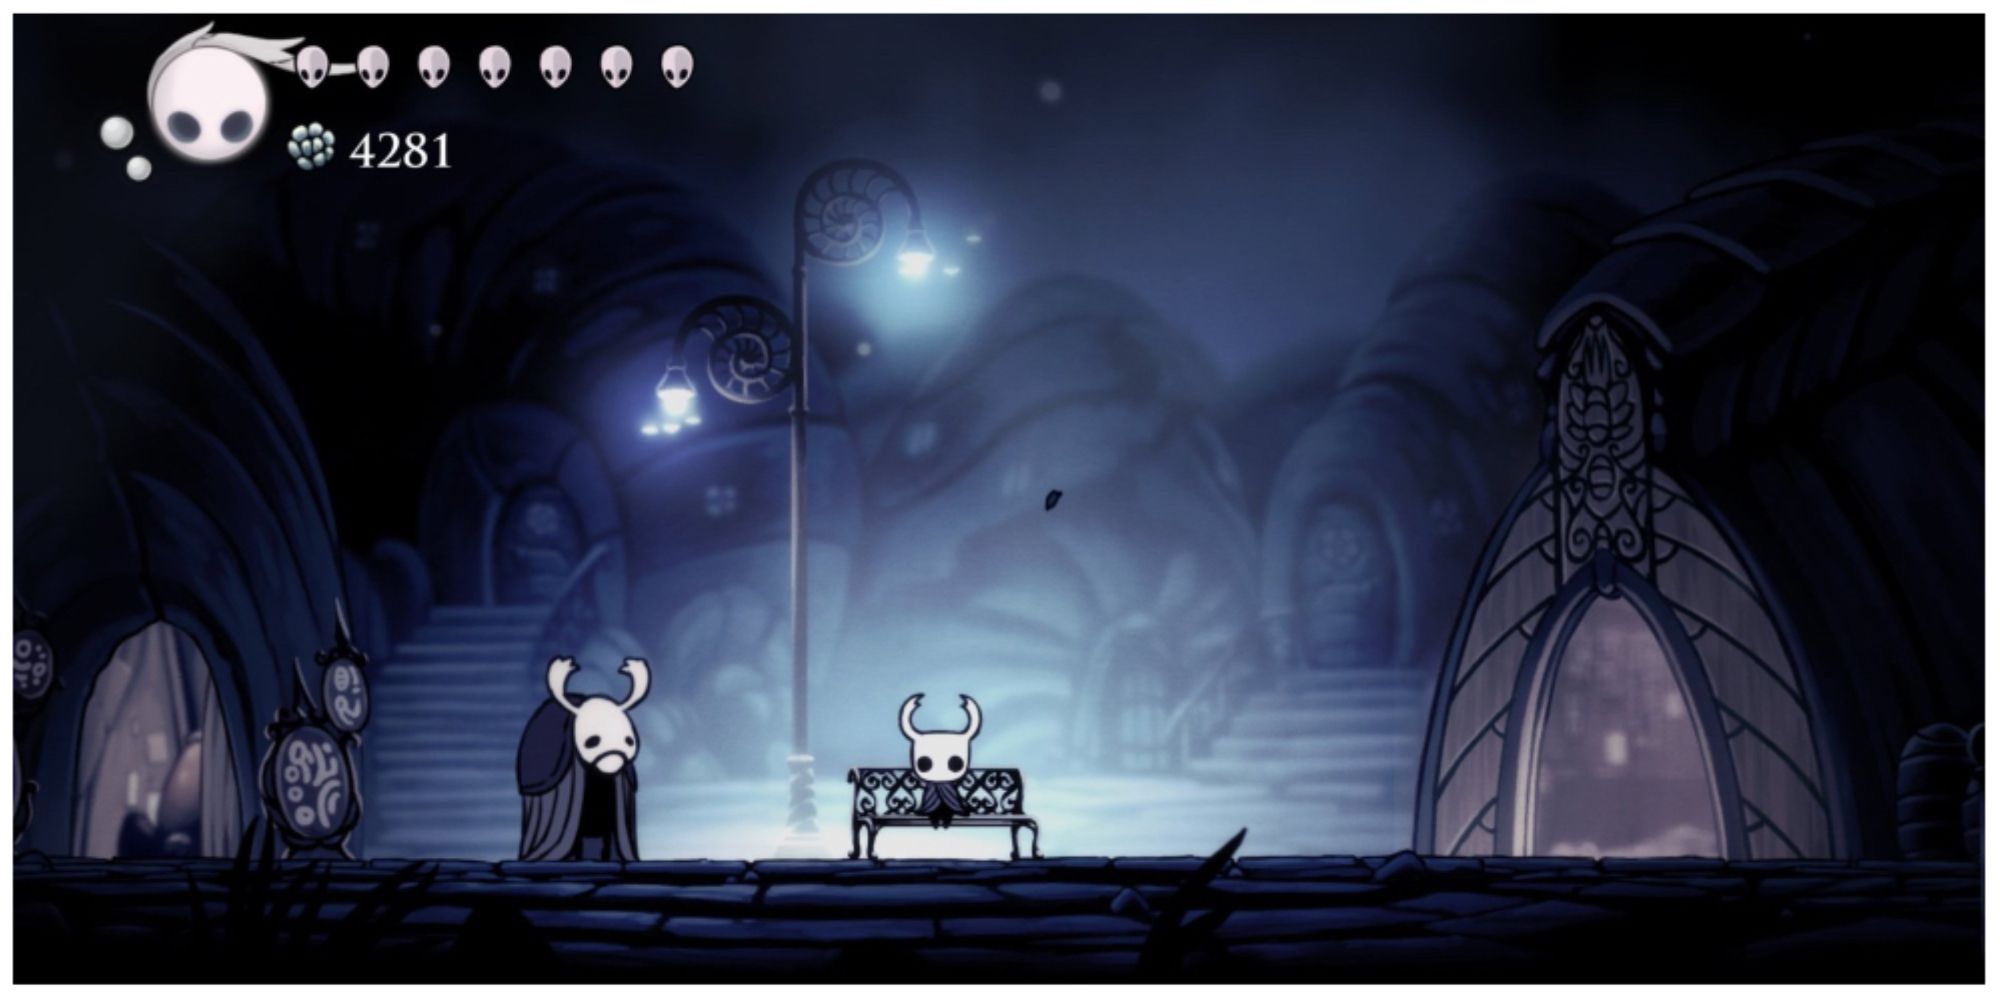 the bench outside Dirtmouth in Hollow Knight